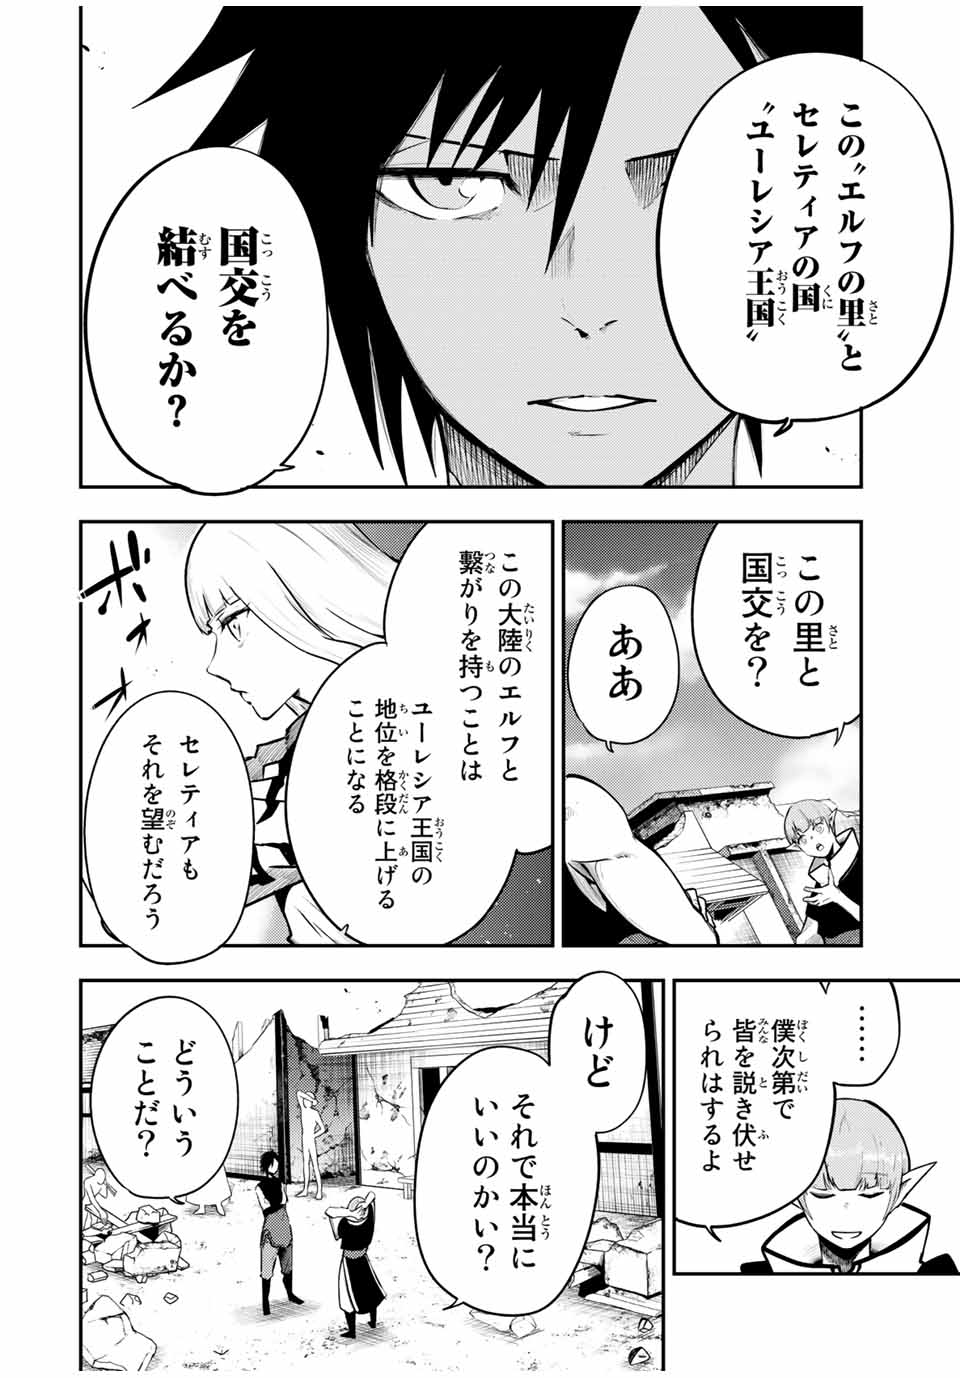 the strongest former prince-; 奴隷転生 ～その奴隷、最強の元王子につき～ 第50話 - Page 14